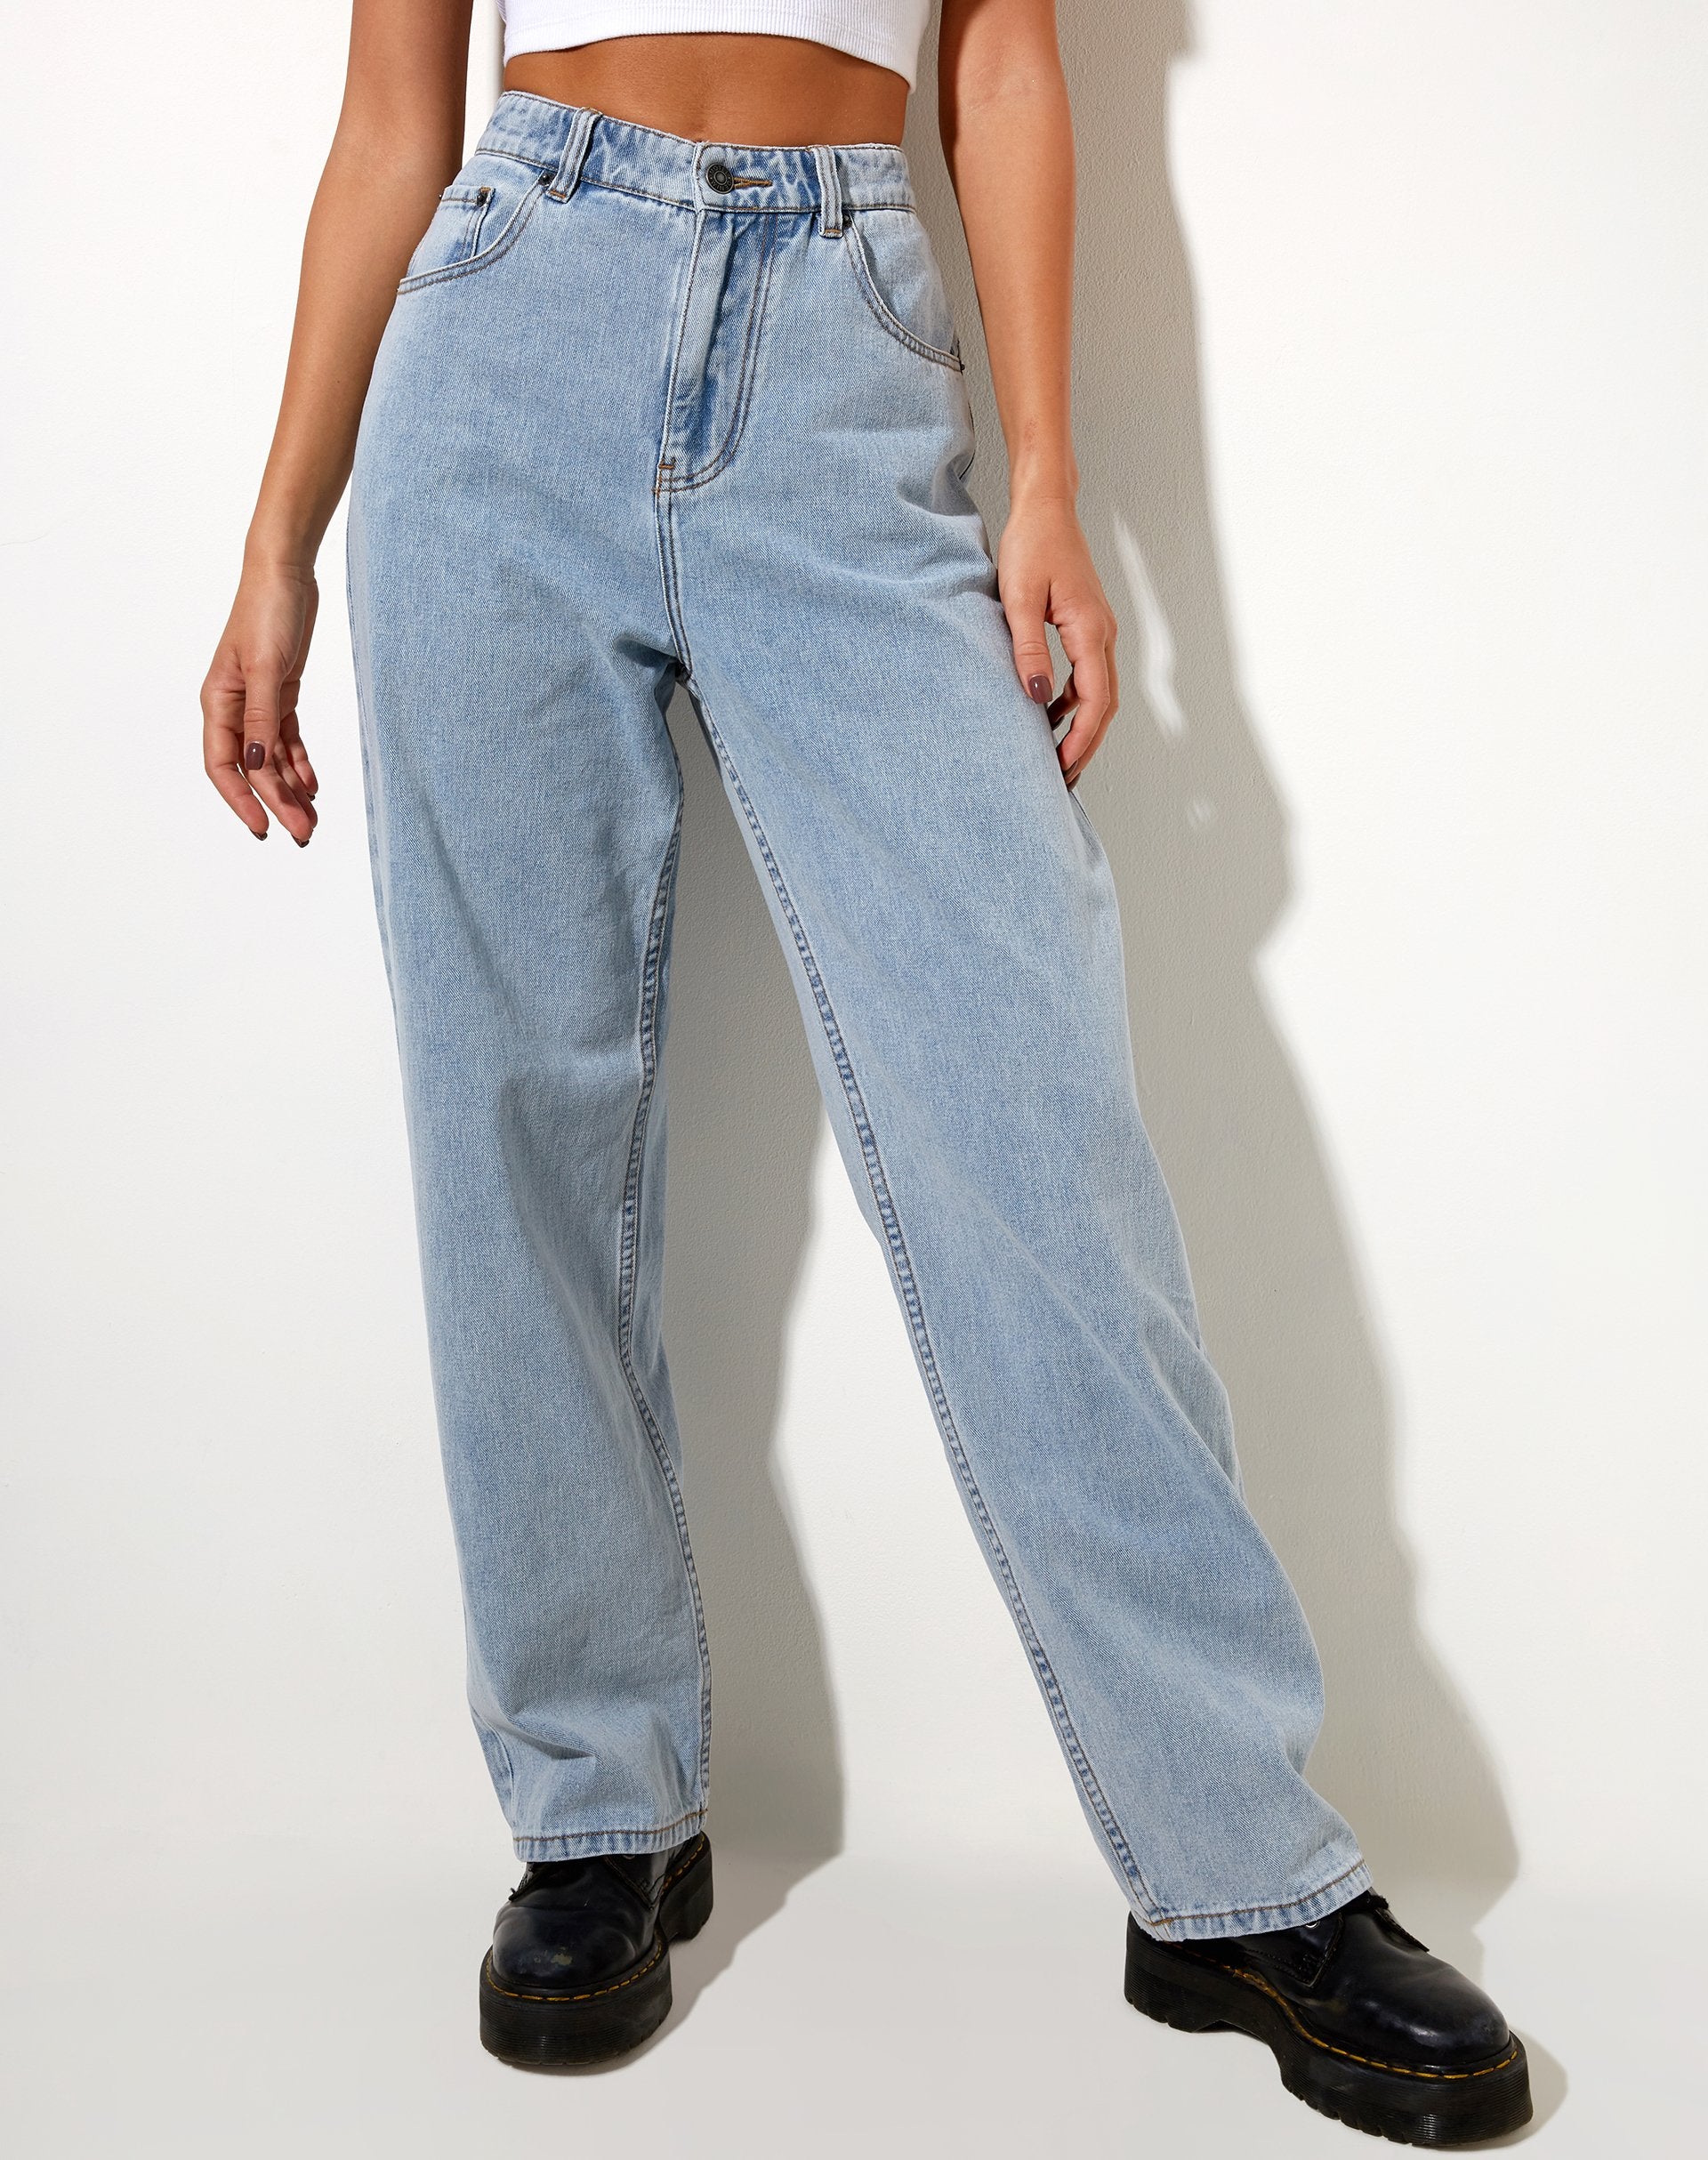 Image of Bum Rips Parallel Jean in Tonal Light Wash